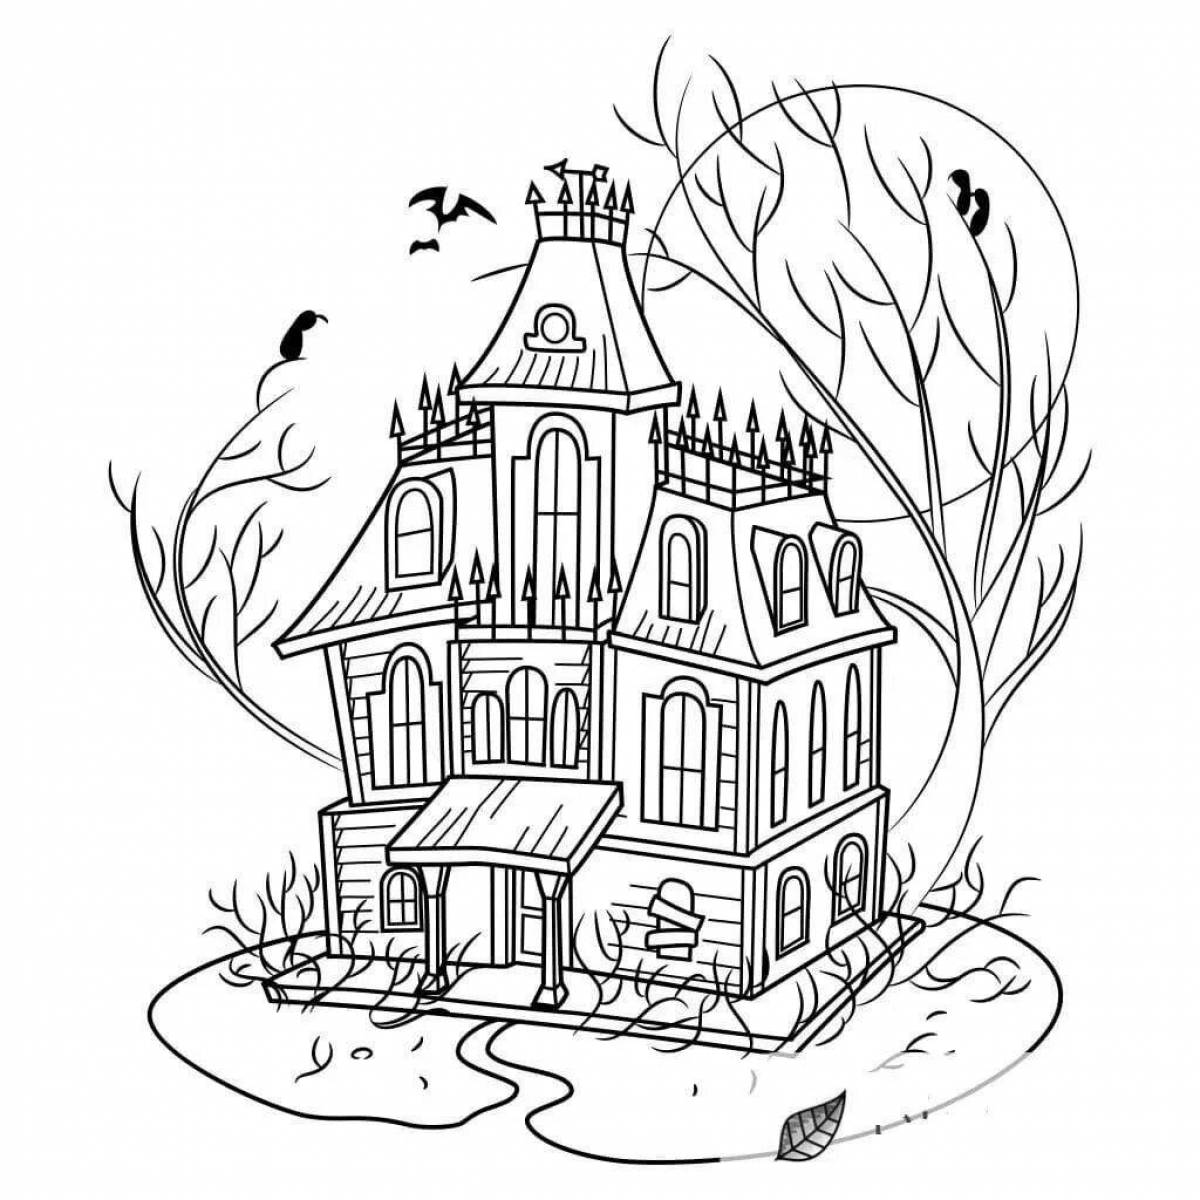 Charming coloring of the old house